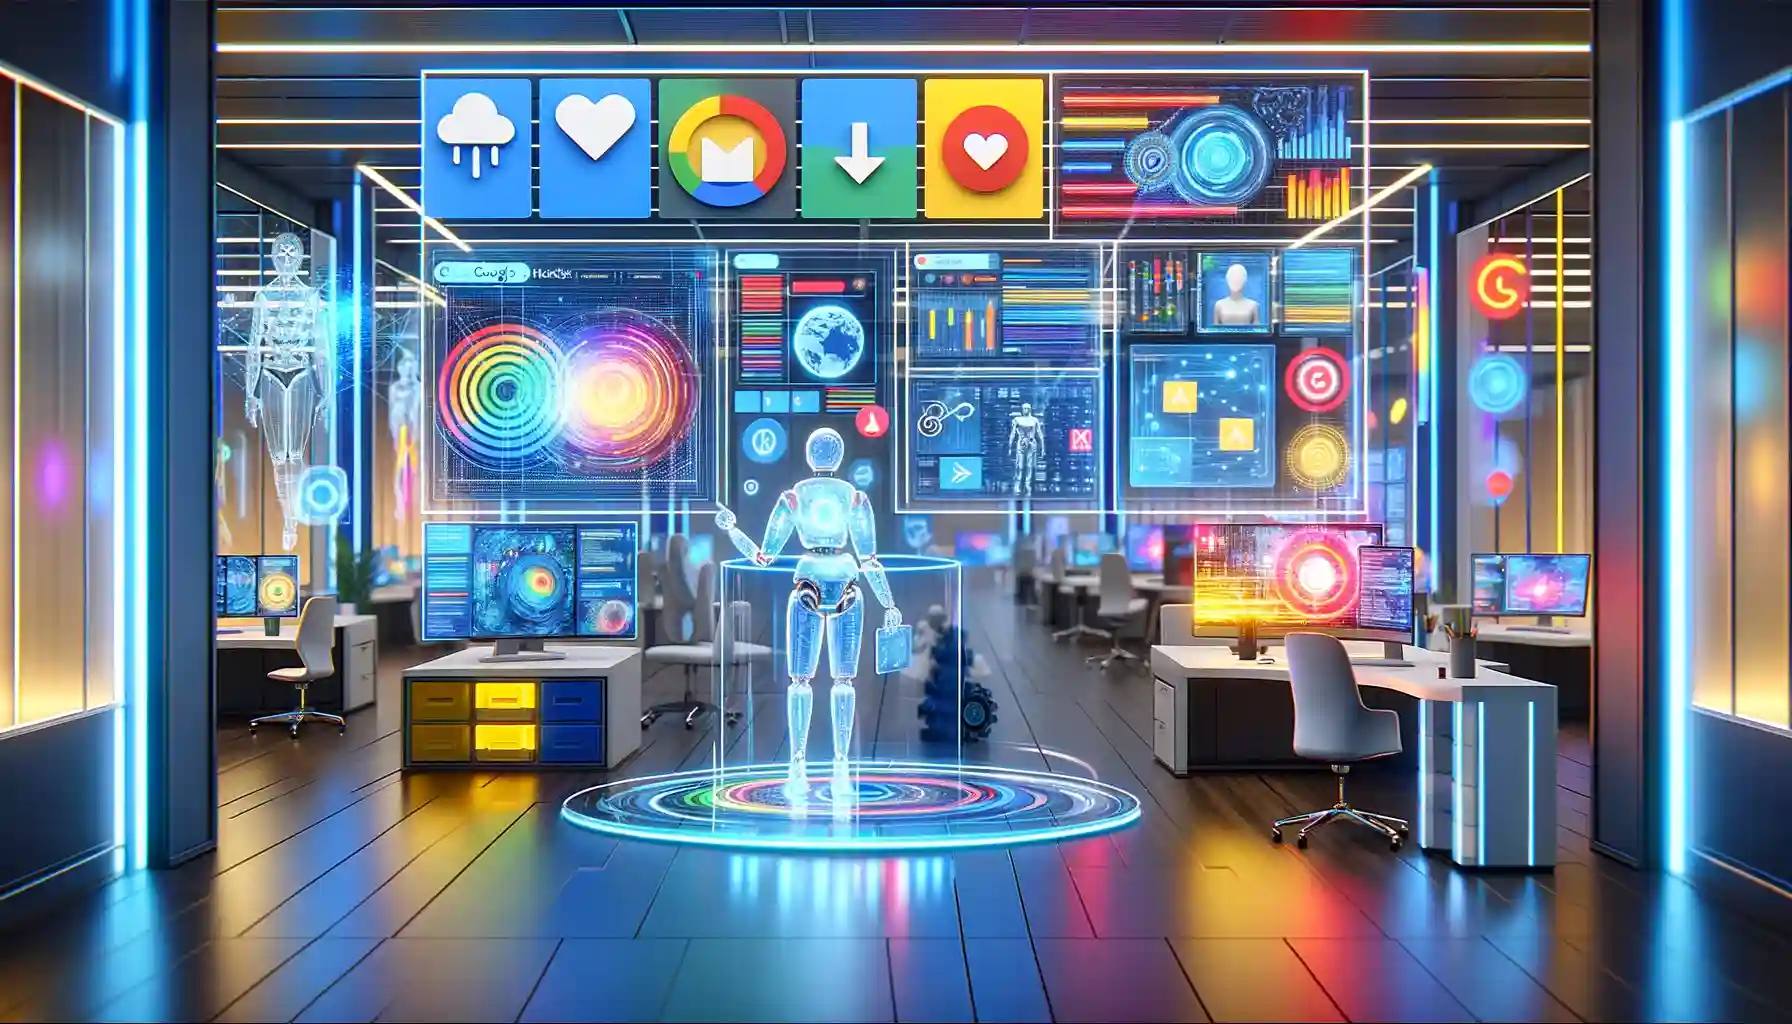 Futuristic scene in Google brand colors showcasing AI technology integration with a high-tech office, holographic interface, smart devices, and robots symbolizing Gemini AI's capabilities.